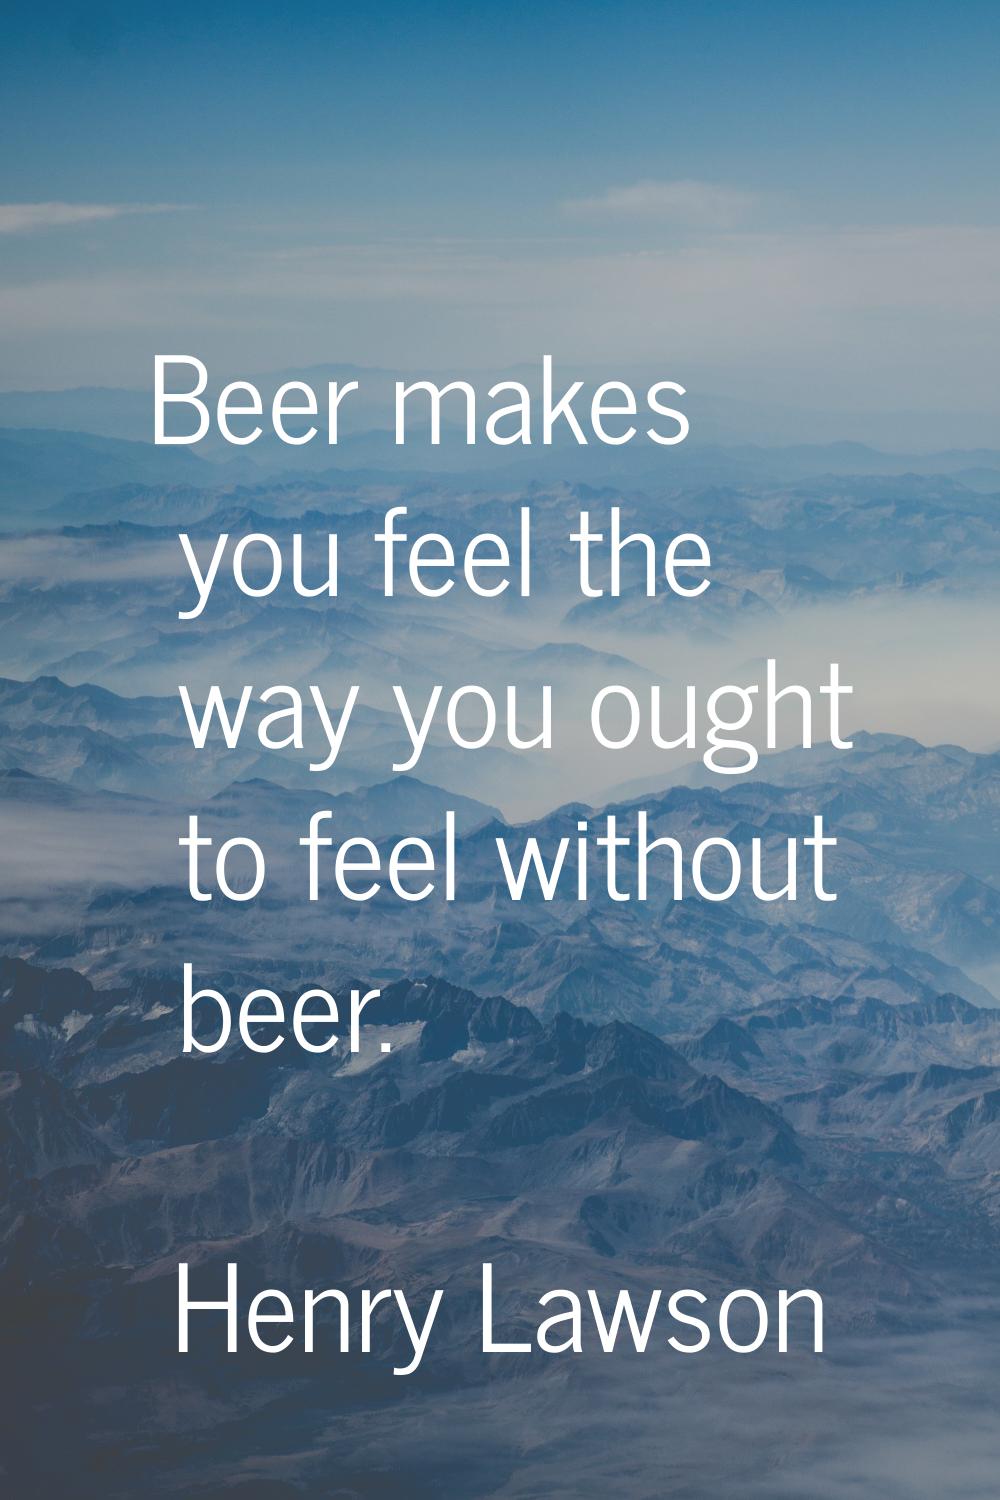 Beer makes you feel the way you ought to feel without beer.